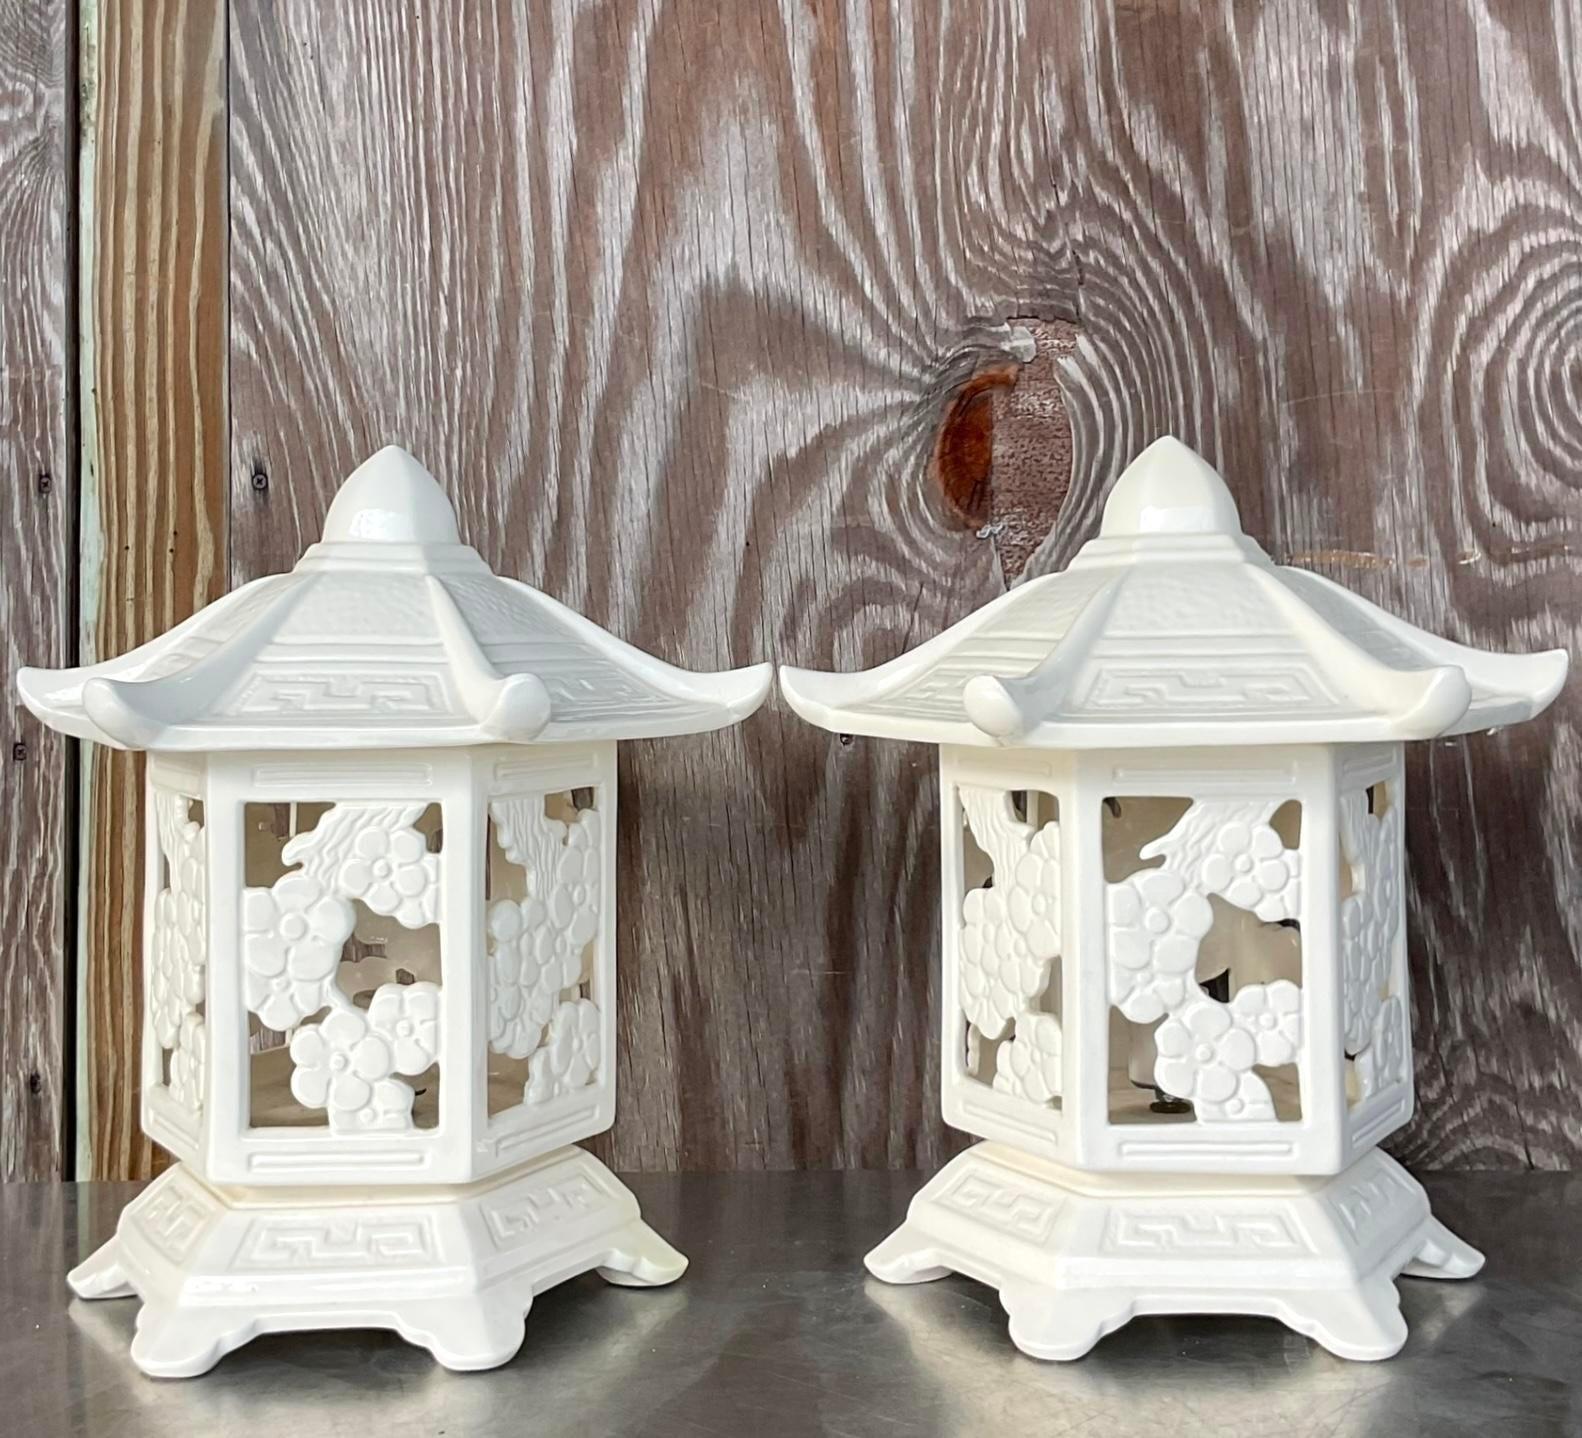 Illuminate your home with the timeless elegance of our Vintage Regency Glazed Ceramic Pagoda Lantern Lamps - A Pair. Inspired by classic American Regency style, these exquisite lamps exude sophistication with their glazed ceramic finish and